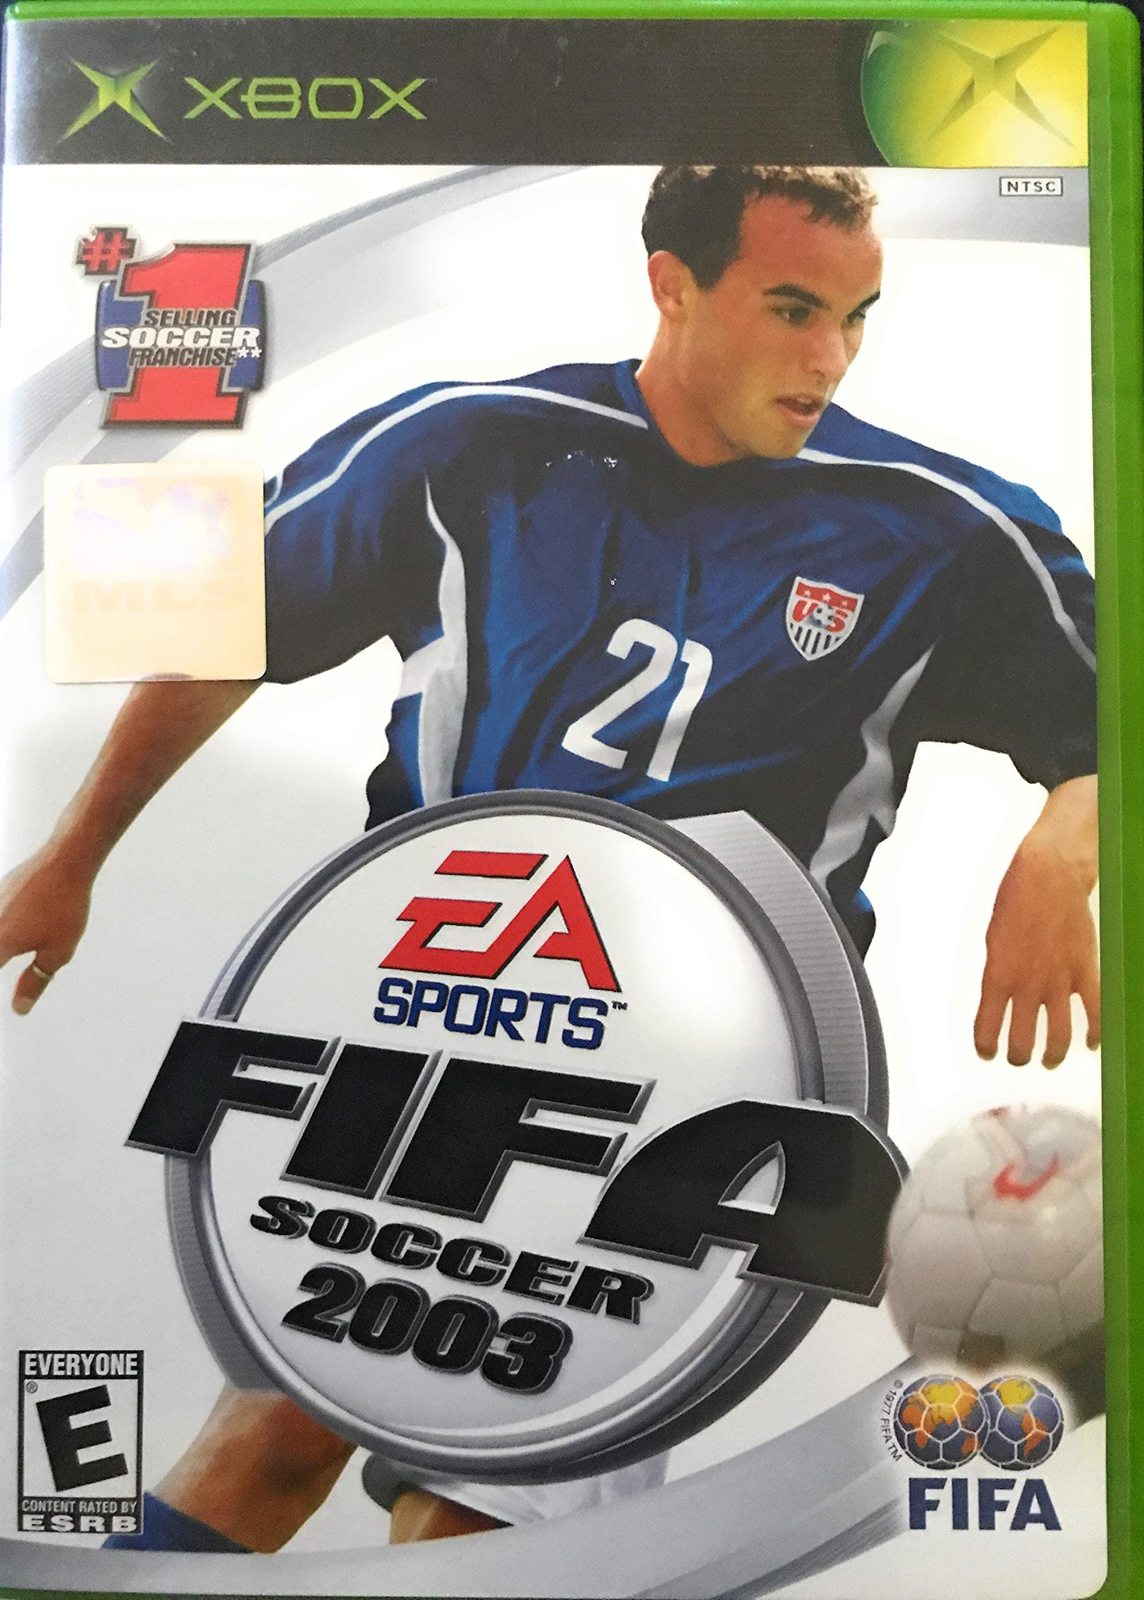 Primary image for FIFA Soccer 2003 - Xbox (Jewel case) [video game]